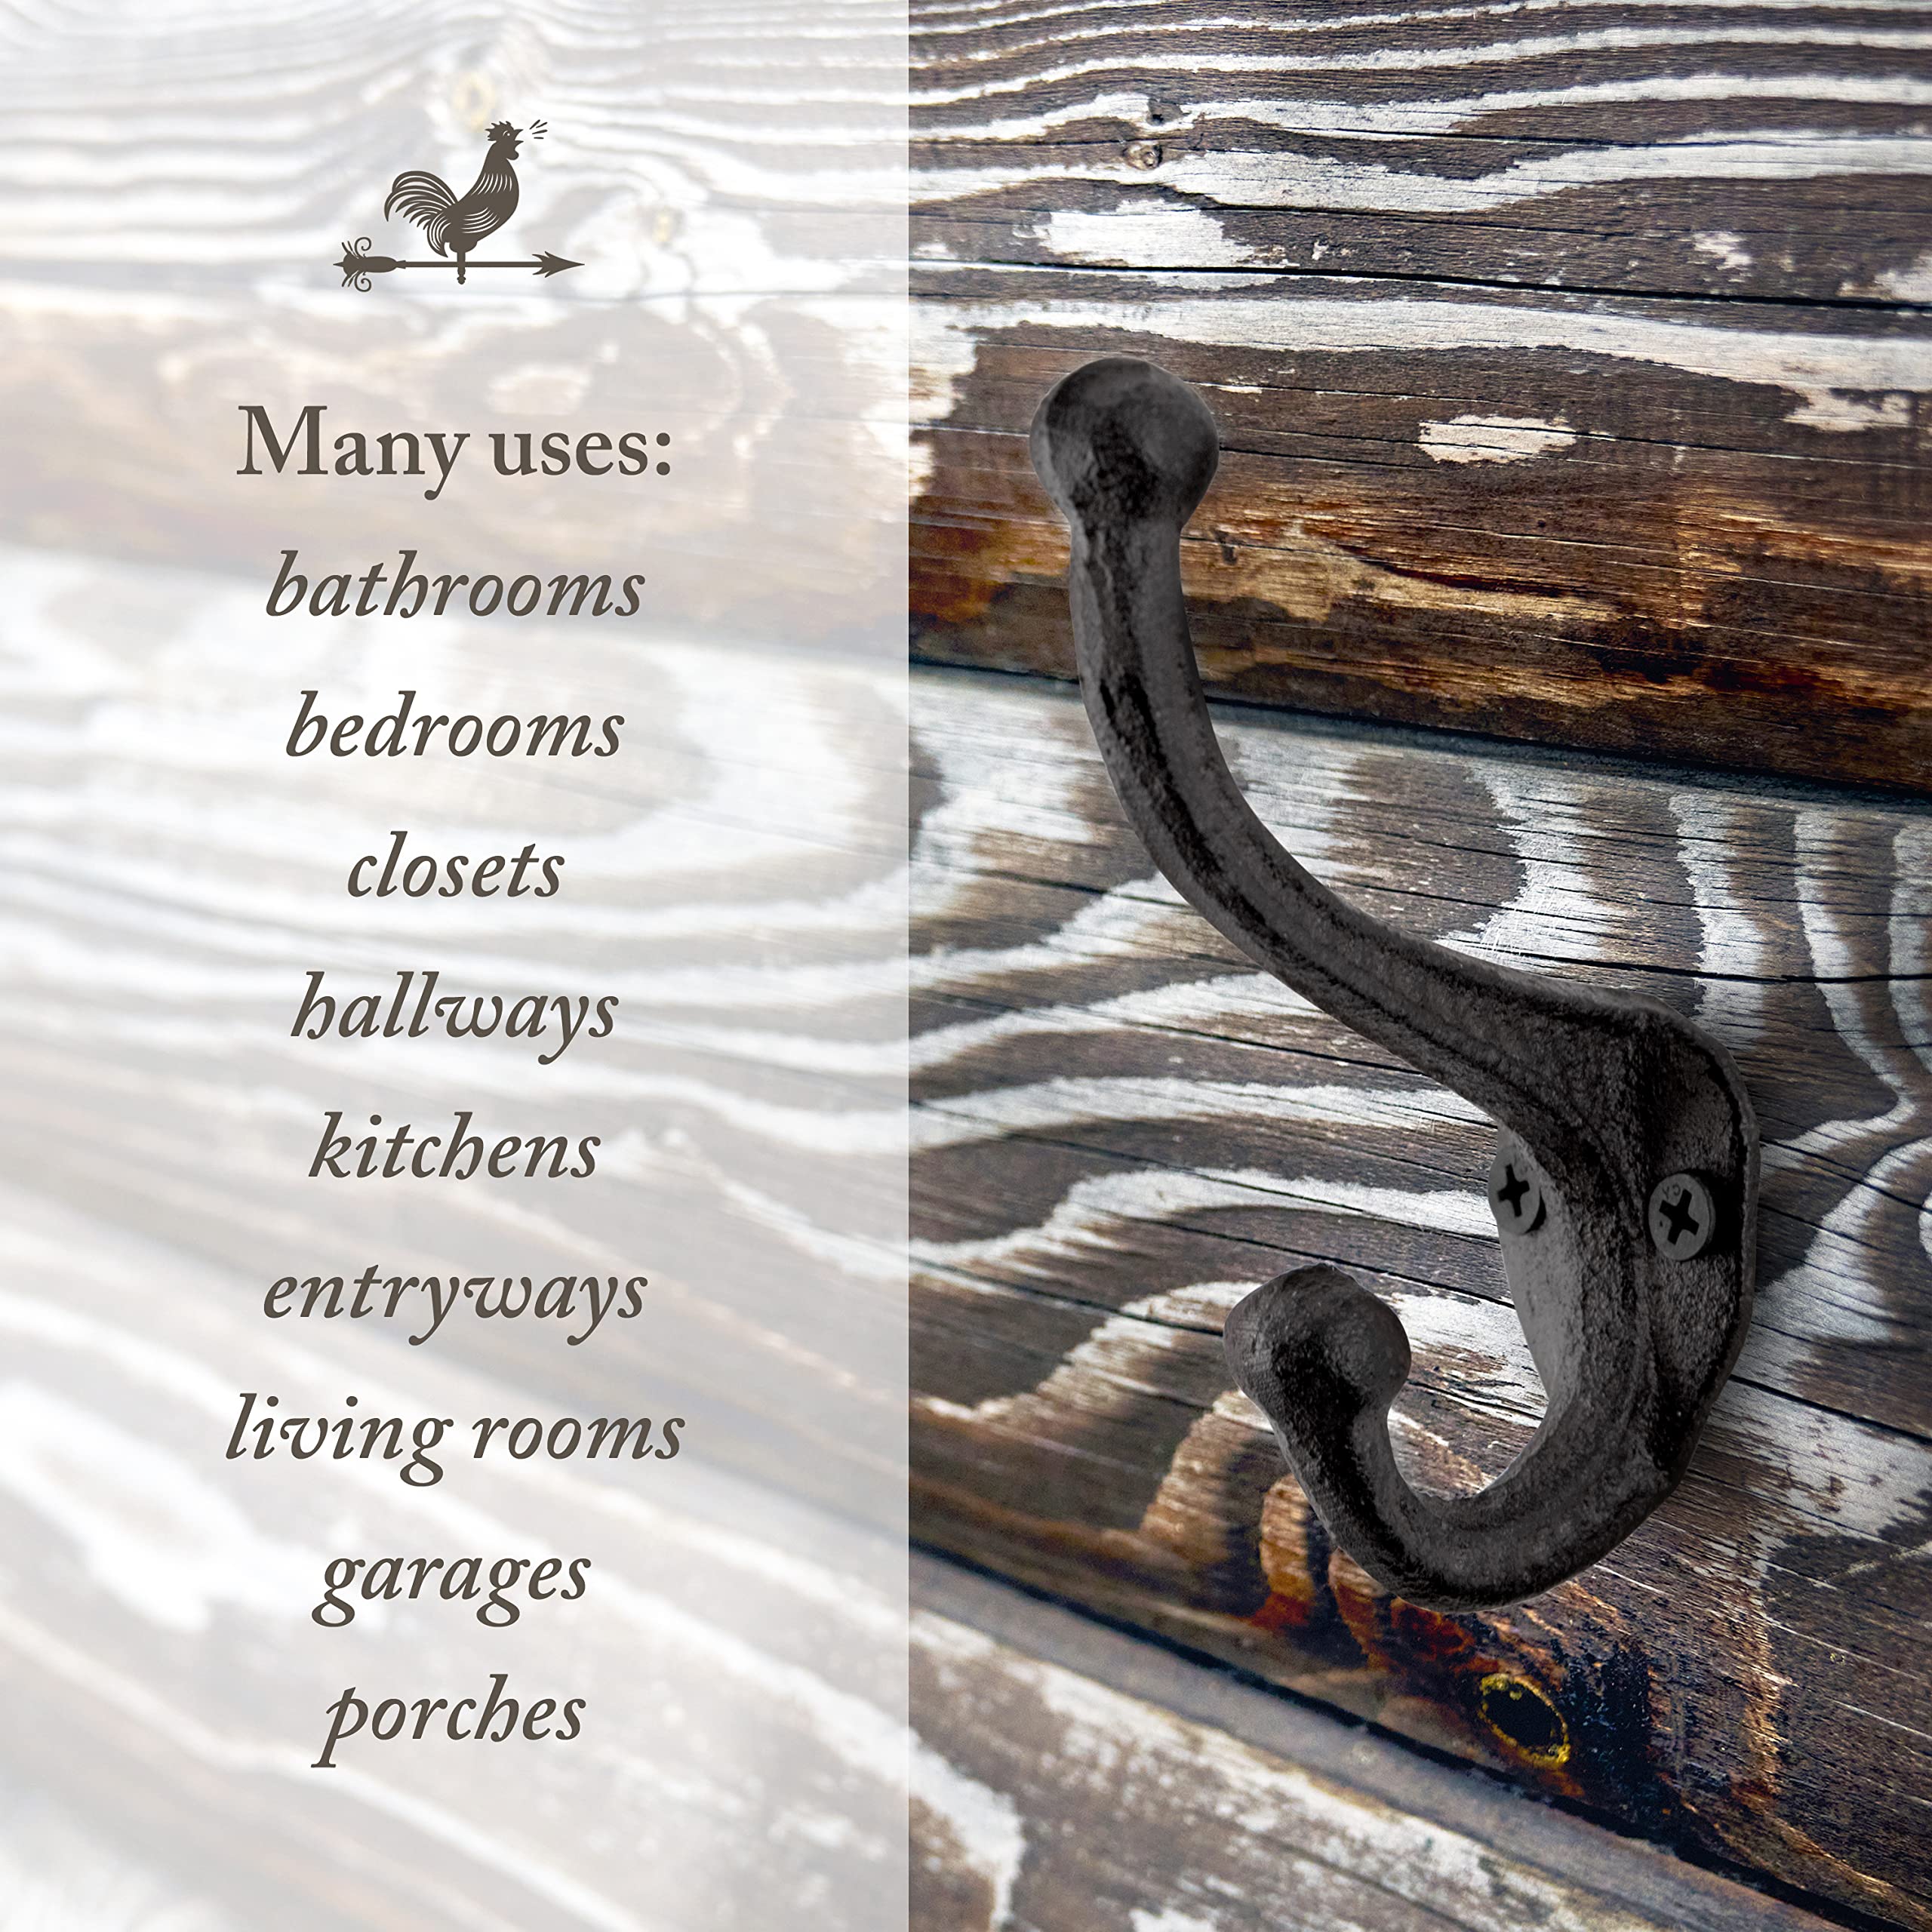 Rustic Cast Iron Coat Hooks Wall Mounted Farmhouse Decorative Wall Hooks, Vintage Hooks for Hanging Coats, Bags, Hats, Towels